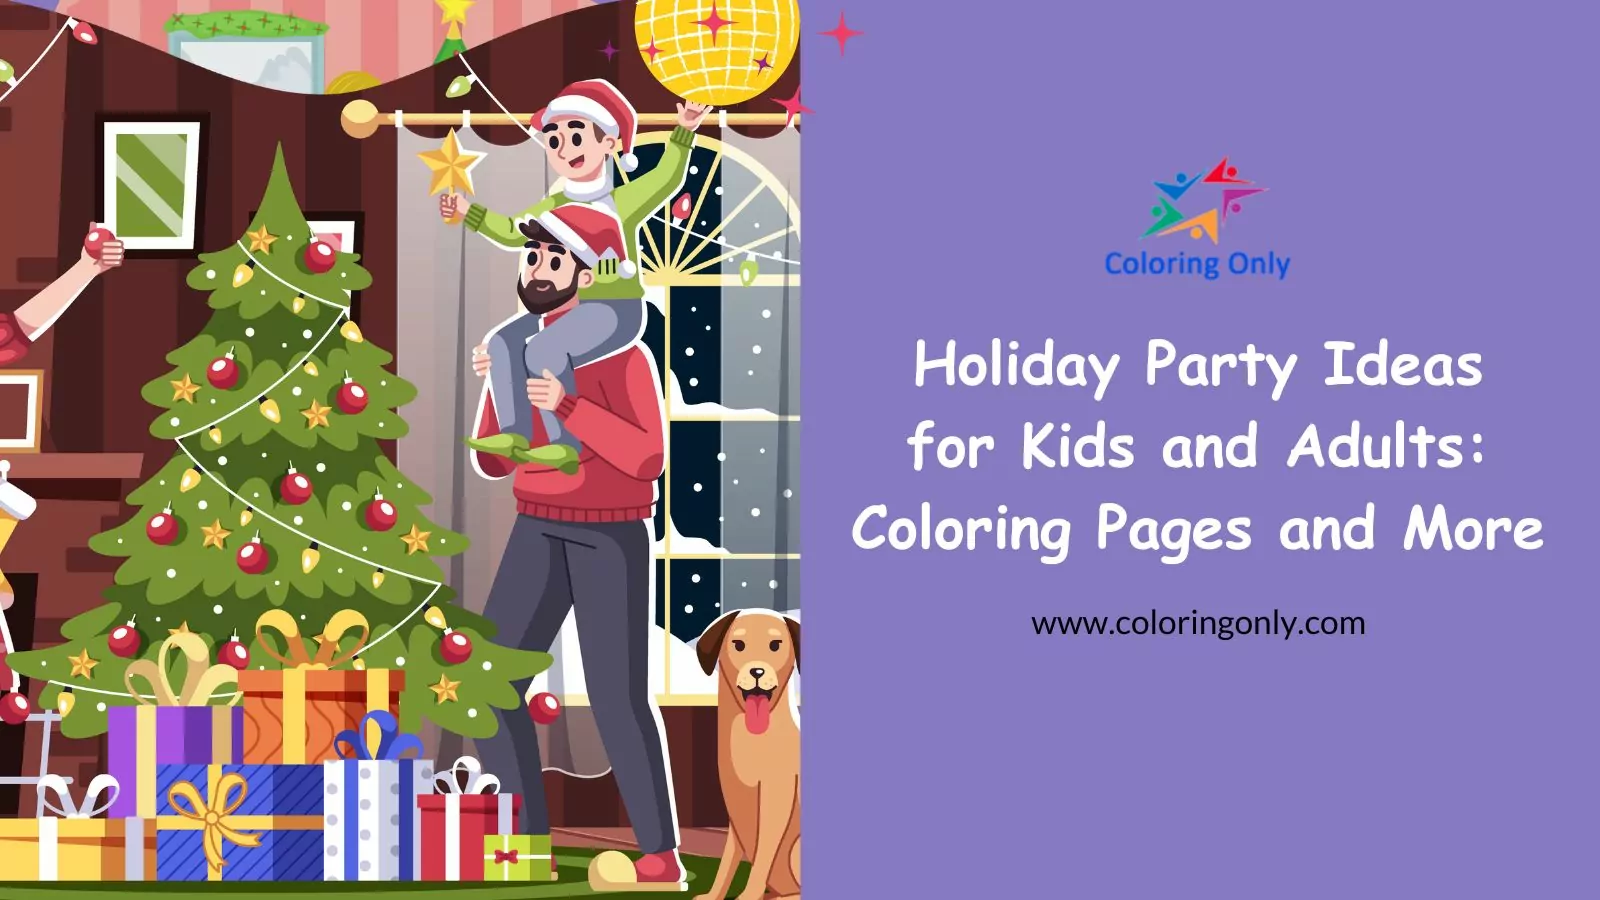 Holiday Party Ideas for Kids and Adults: Coloring Pages and More